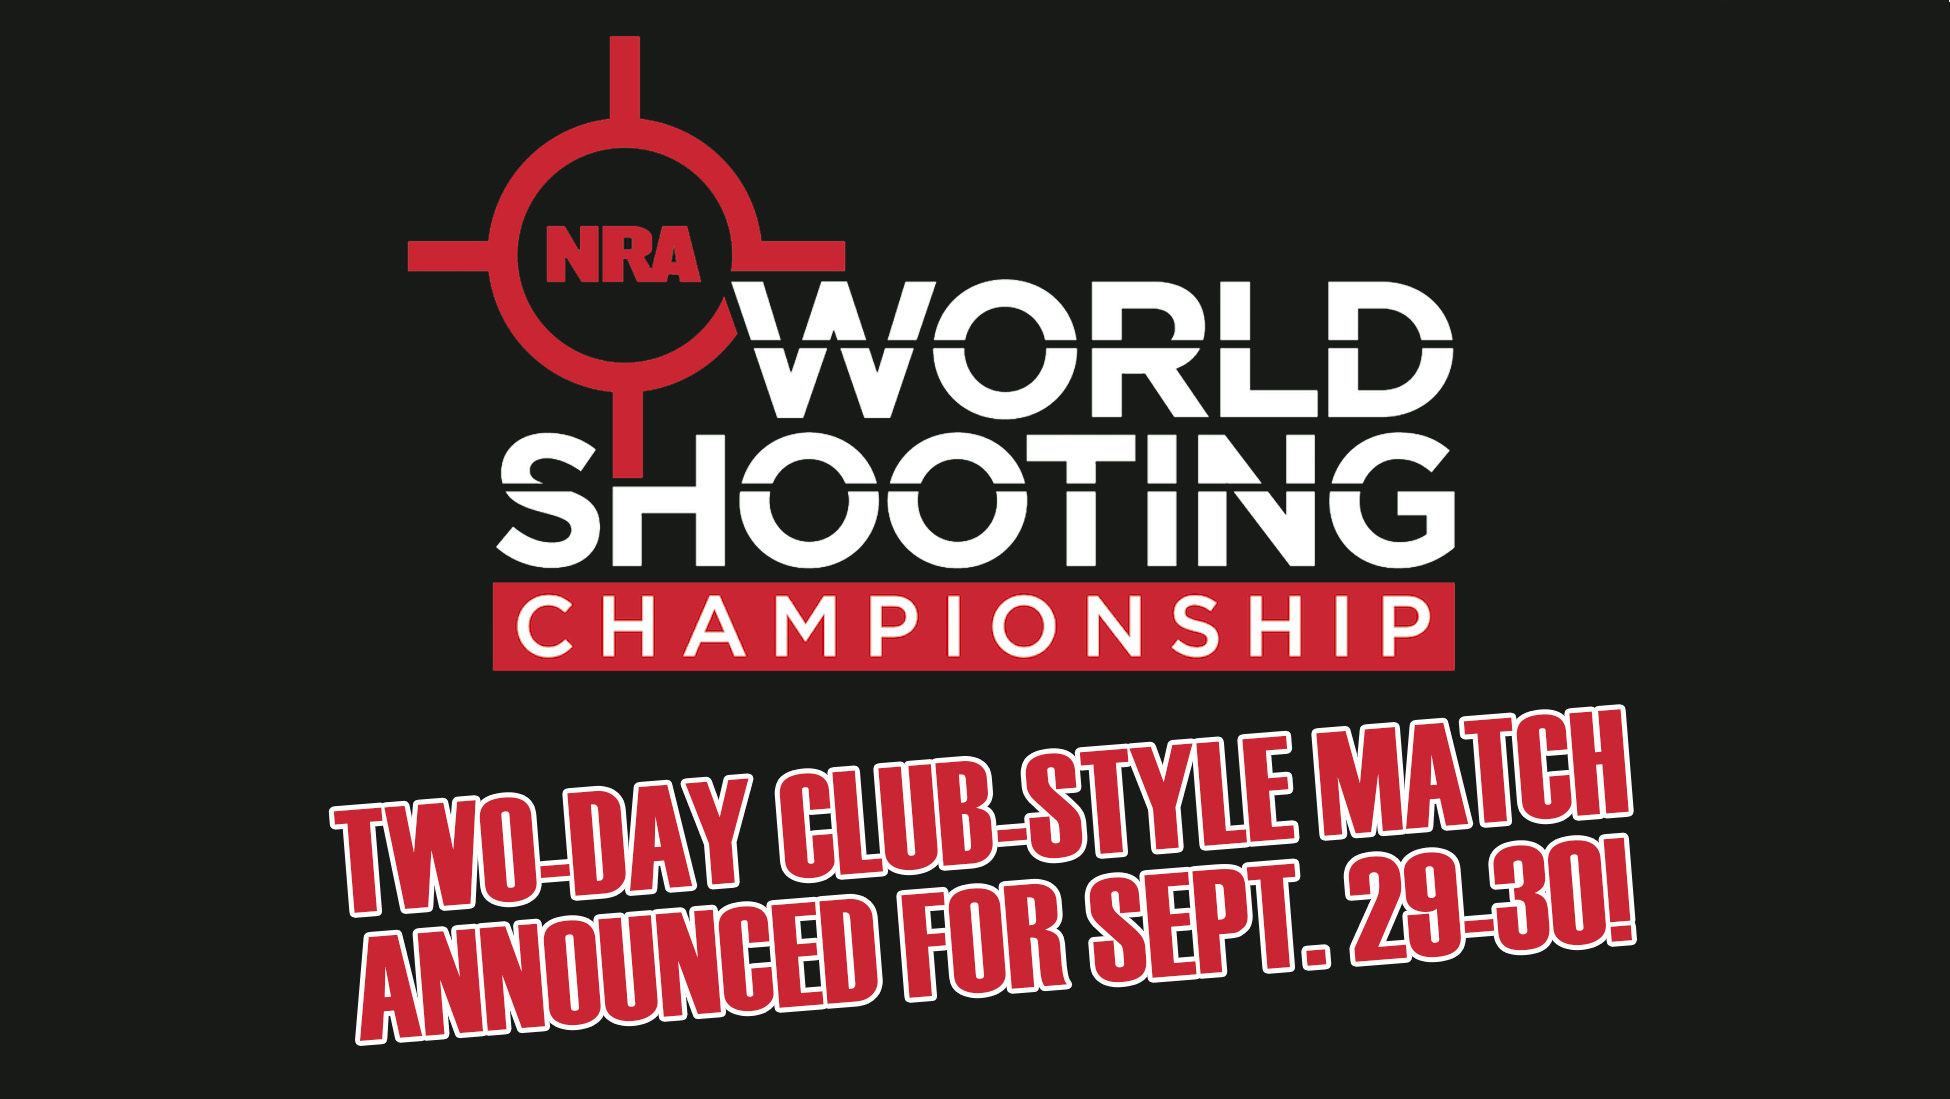 Missed the NRA World Shooting Championship? There’s a Second Match Scheduled!